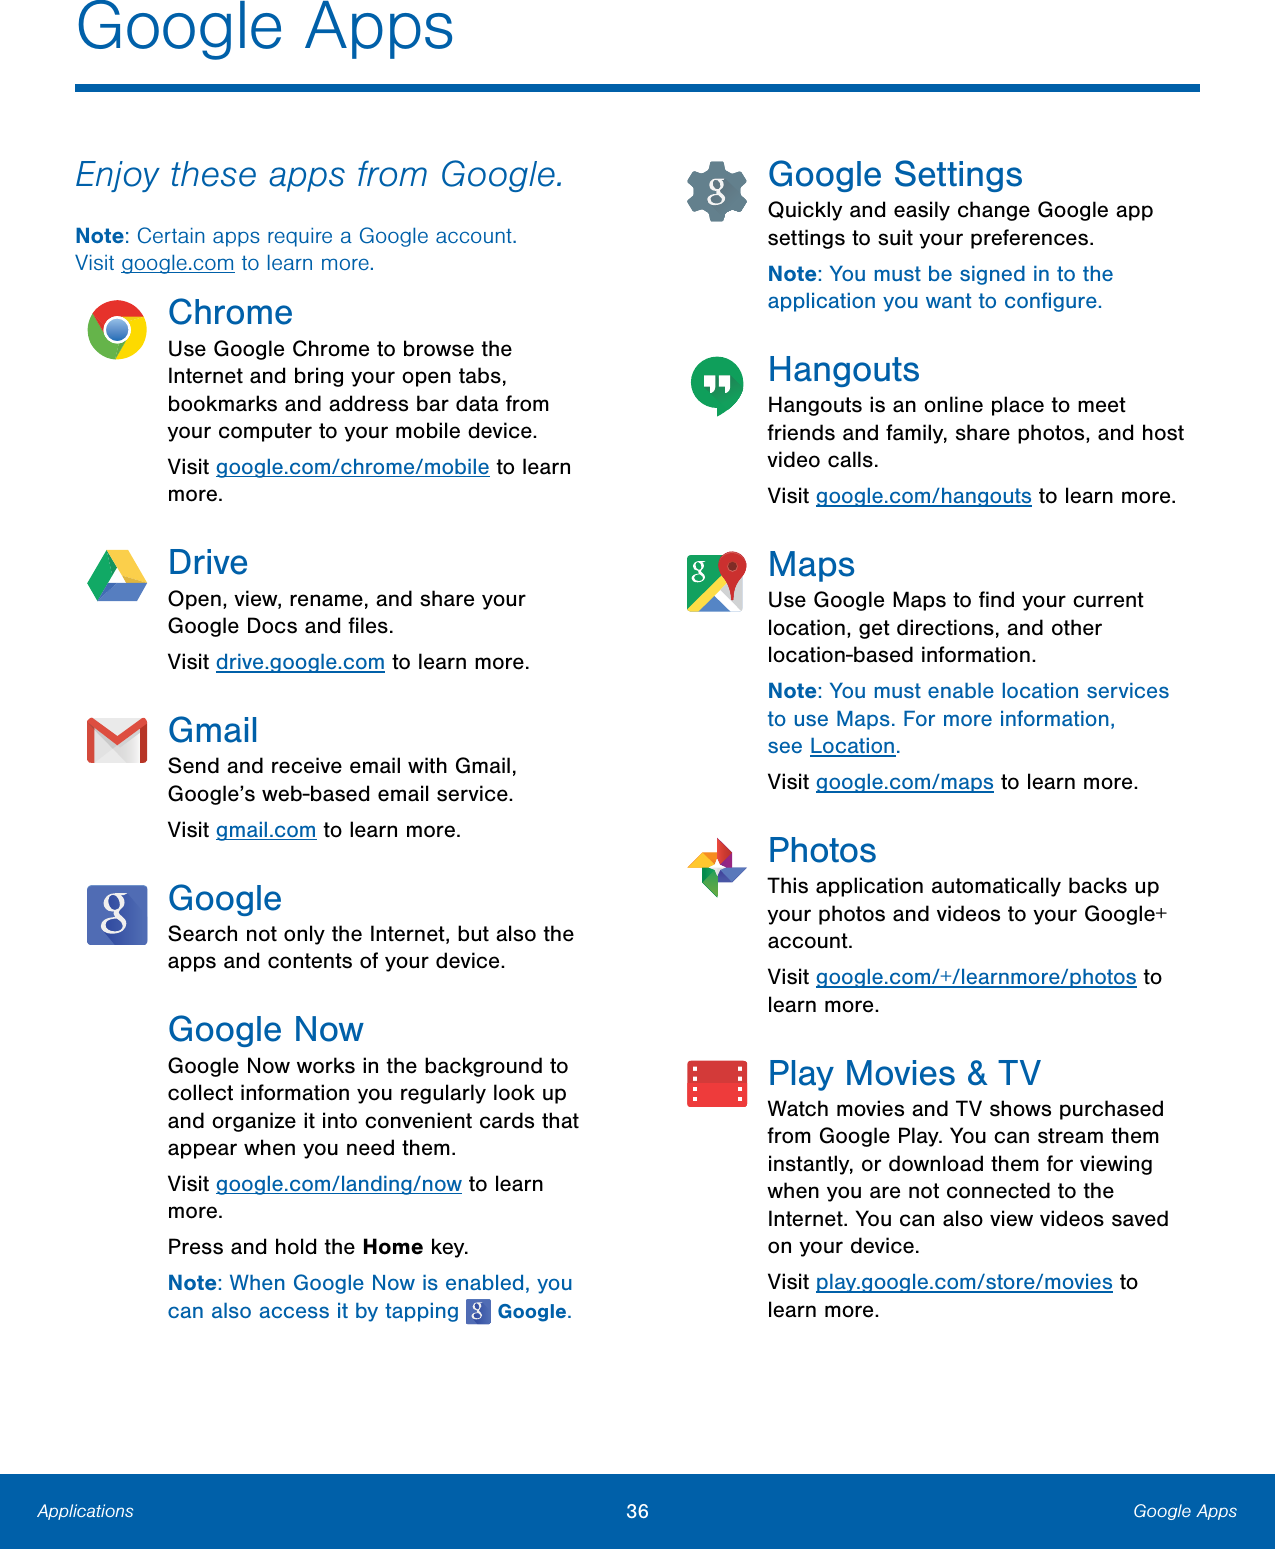 36  Google Apps Applications  Google Apps  Enjoy these apps from Google. Note: Certain apps require a Google account.  Visit google.com to learn more. Chrome Use Google Chrome to browse the Internet and bring your open tabs, bookmarks and address bar data from your computer to your mobile device. Visit google.com/chrome/mobile to learn more. Drive Open, view, rename, and share your  Google Docs and ﬁles.  Visit drive.google.com to learn more.  Gmail Send and receive email with Gmail, Google’s web-based email service. Visit gmail.com to learn more. Google Search not only the Internet, but also the apps and contents of your device. Google Now Google Now works in the background to  collect information you regularly look up  and organize it into convenient cards that  appear when you need them.  Visit google.com/landing/now to learn  more.  Press and hold the Home key.  Note: When Google Now is enabled, you  can also access it by tapping    Google. Google Settings Quickly and easily change Google app settings to suit your preferences. Note: You must be signed in to the application you want to conﬁgure. Hangouts Hangouts is an online place to meet friends and family, share photos, and host video calls. Visit google.com/hangouts to learn more. Maps Use Google Maps to ﬁnd your current location, get directions, and other location-based information. Note: You must enable location services to use Maps. For more information, seeLocation. Visit google.com/maps to learn more. Photos This application automatically backs up your photos and videos to your Google+ account. Visit google.com/+/learnmore/photos to learn more. Play Movies &amp; TV Watch movies and TV shows purchased from Google Play. You can stream them instantly, or download them for viewing when you are not connected to the Internet. You can also view videos saved on your device. Visit play.google.com/store/movies to learn more. 